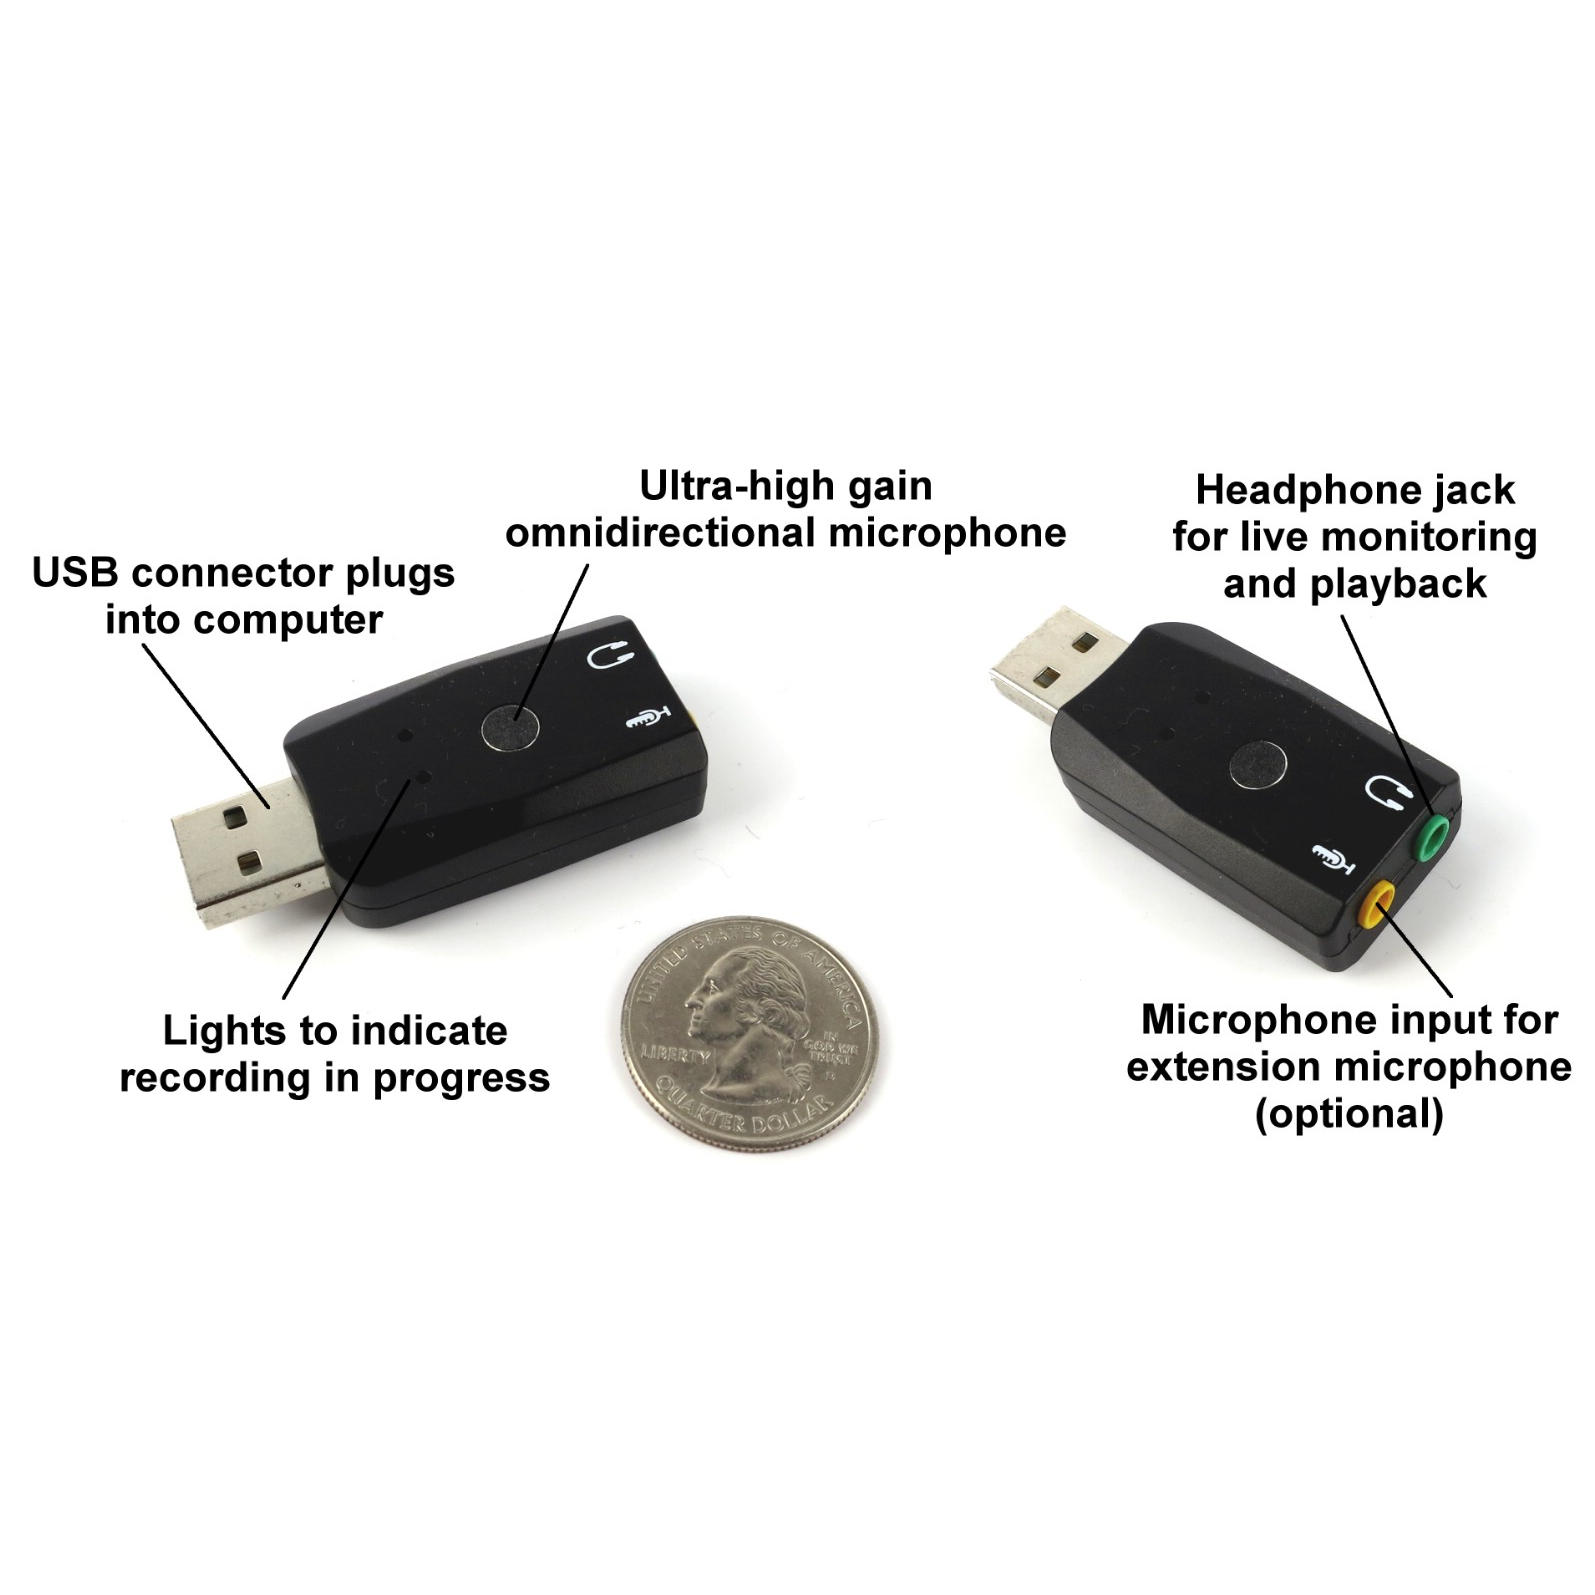 High output miniature USB microphone for computers Questions & Answers